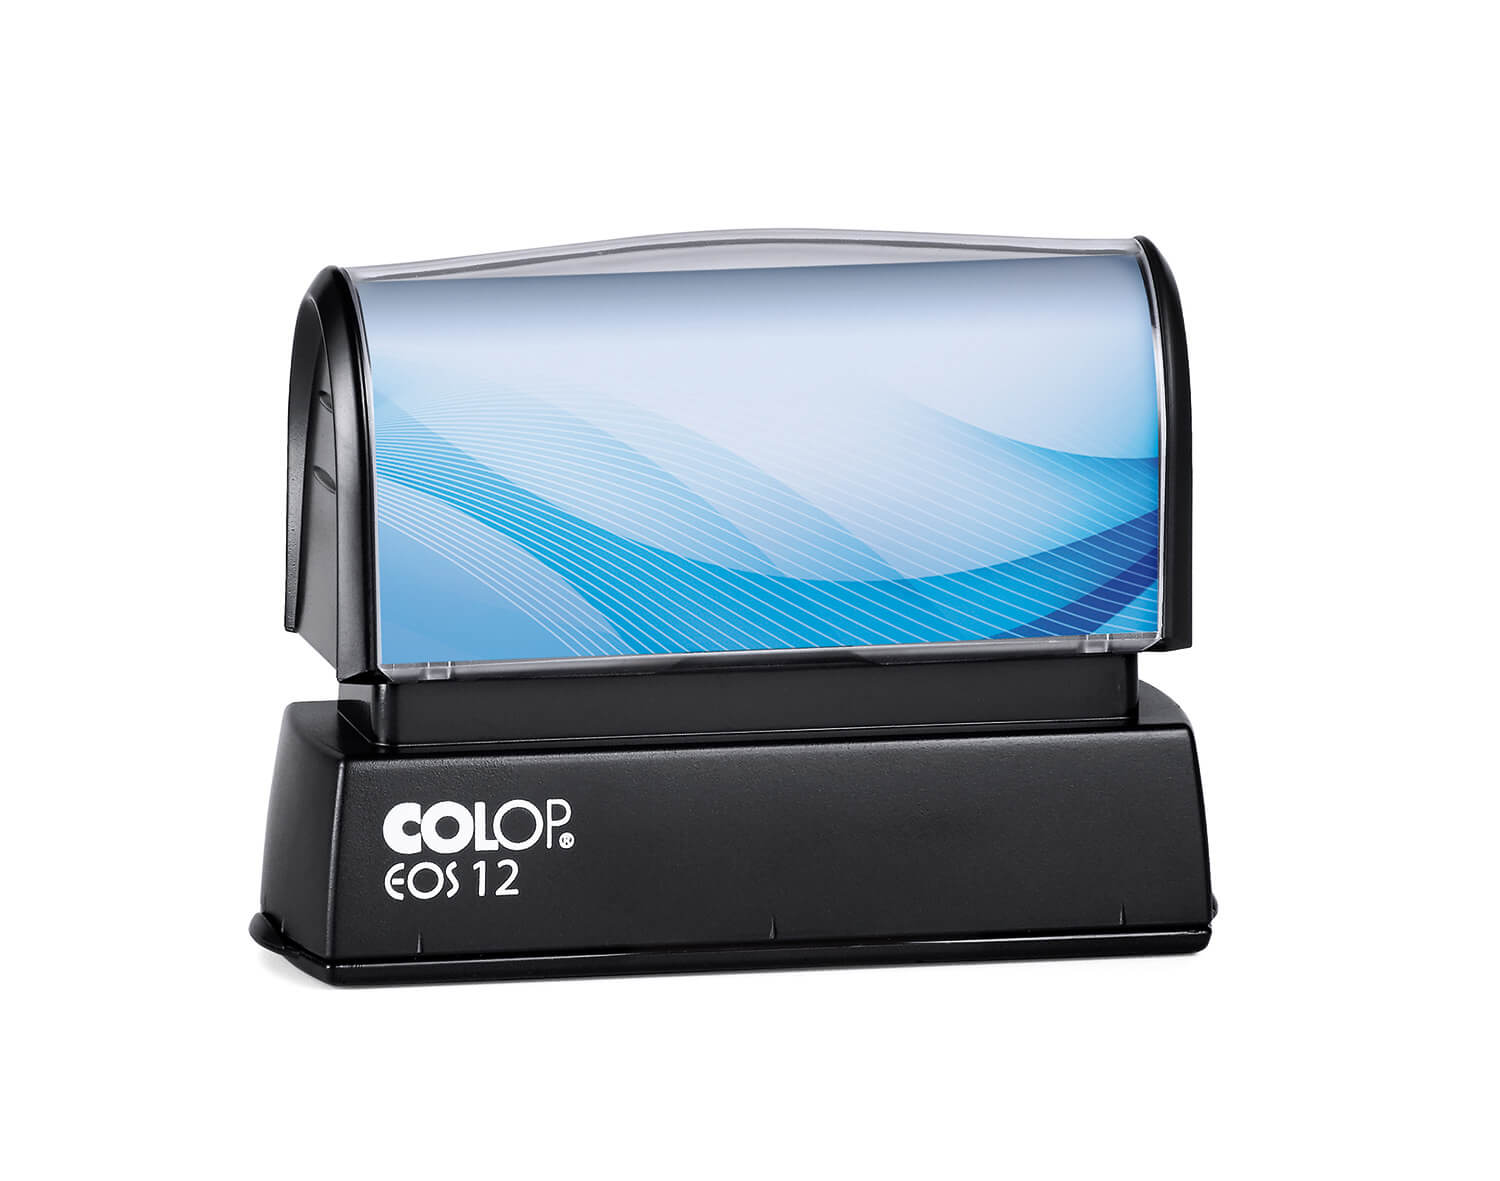 Colop EOS-12 Pre-inked Stamp